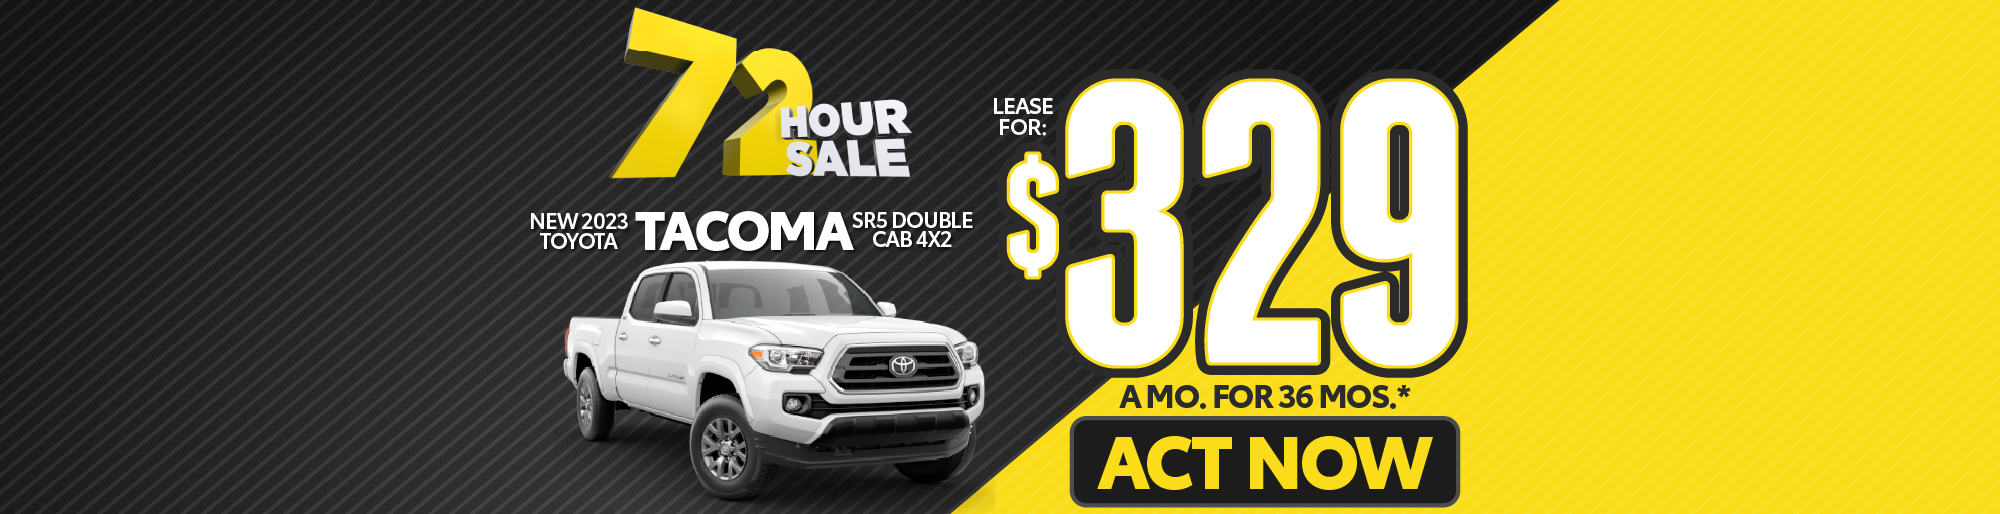 New 2023 Toyota Tacoma SR5 Double Cab 4x2 Lease for only $329/mo.* ACT NOW